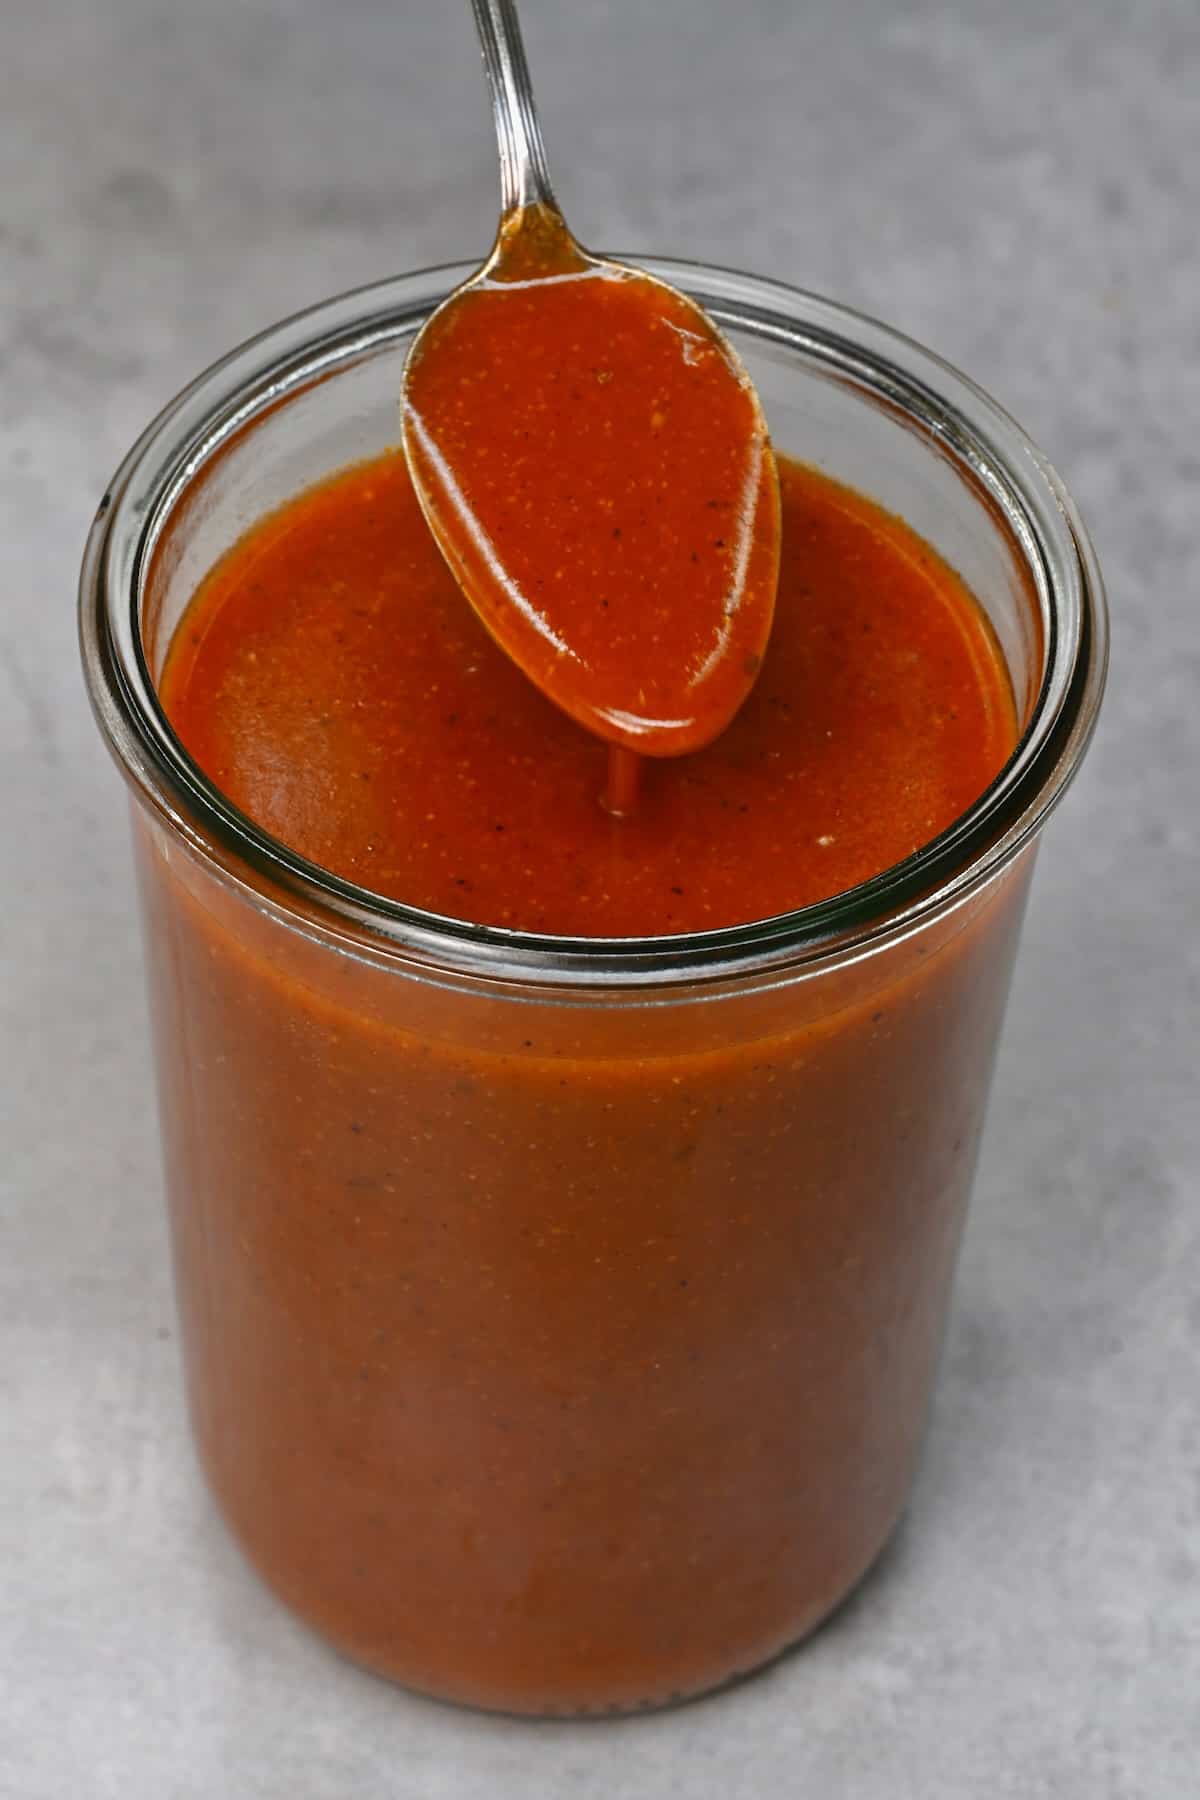 A spoonful of homemade enchilada sauce